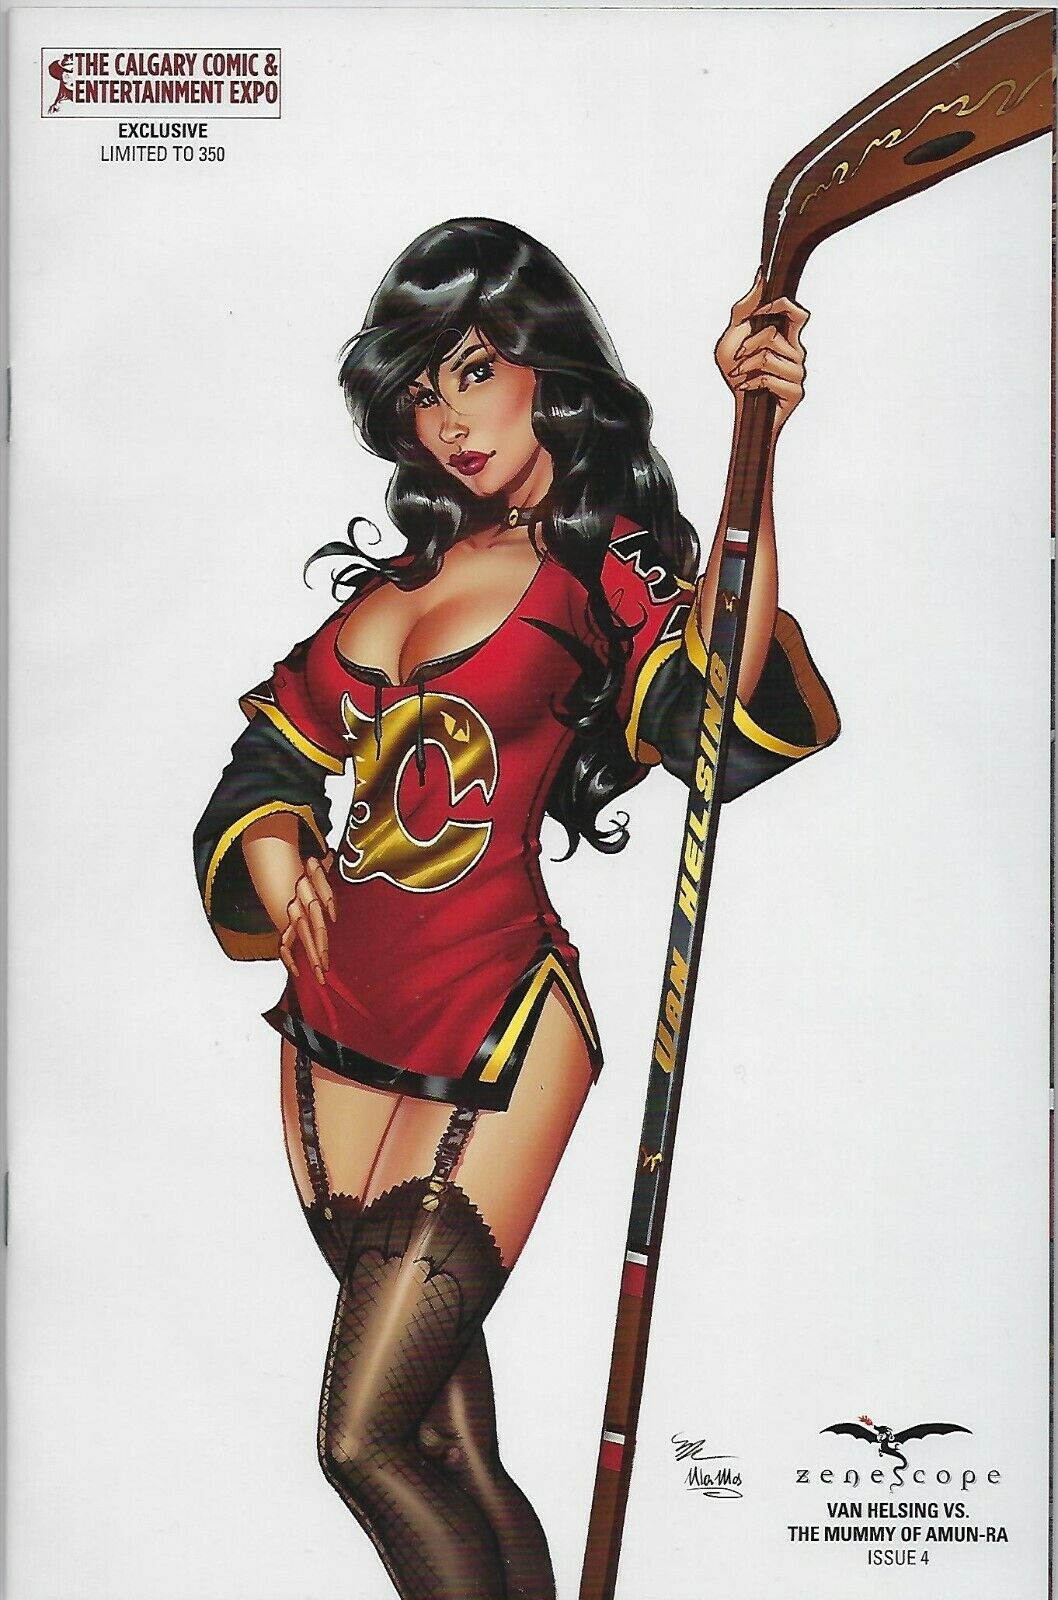 Van Helsing VS The Mummy Of Amun-Ra # 4 Calgary Comic Expo Mike Krome Limited to 350 NM